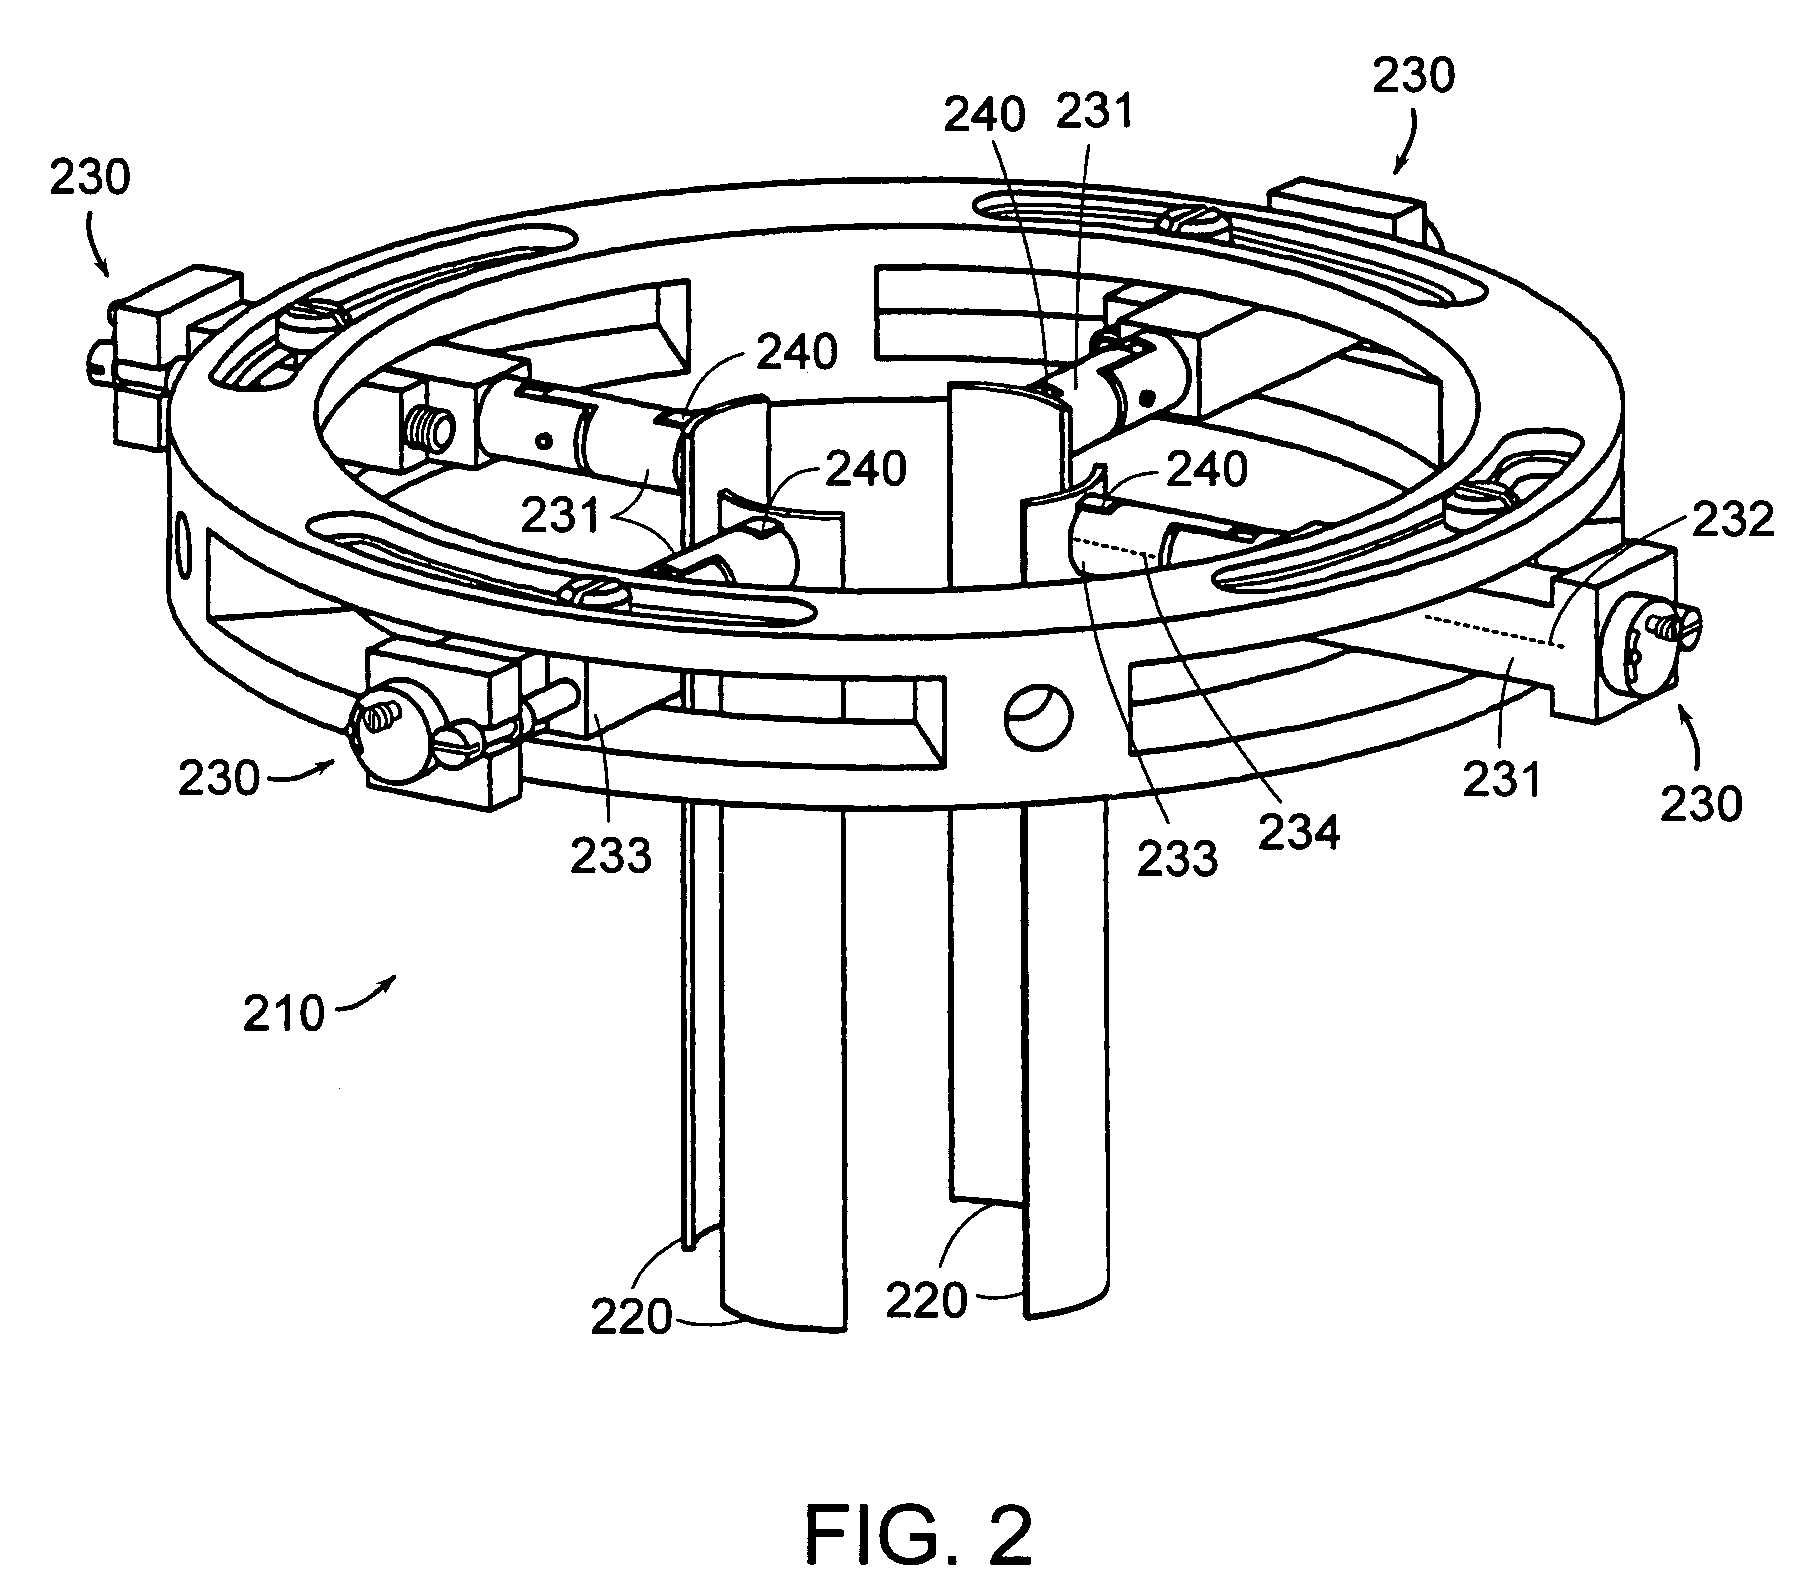 Surgical retractor positioning device